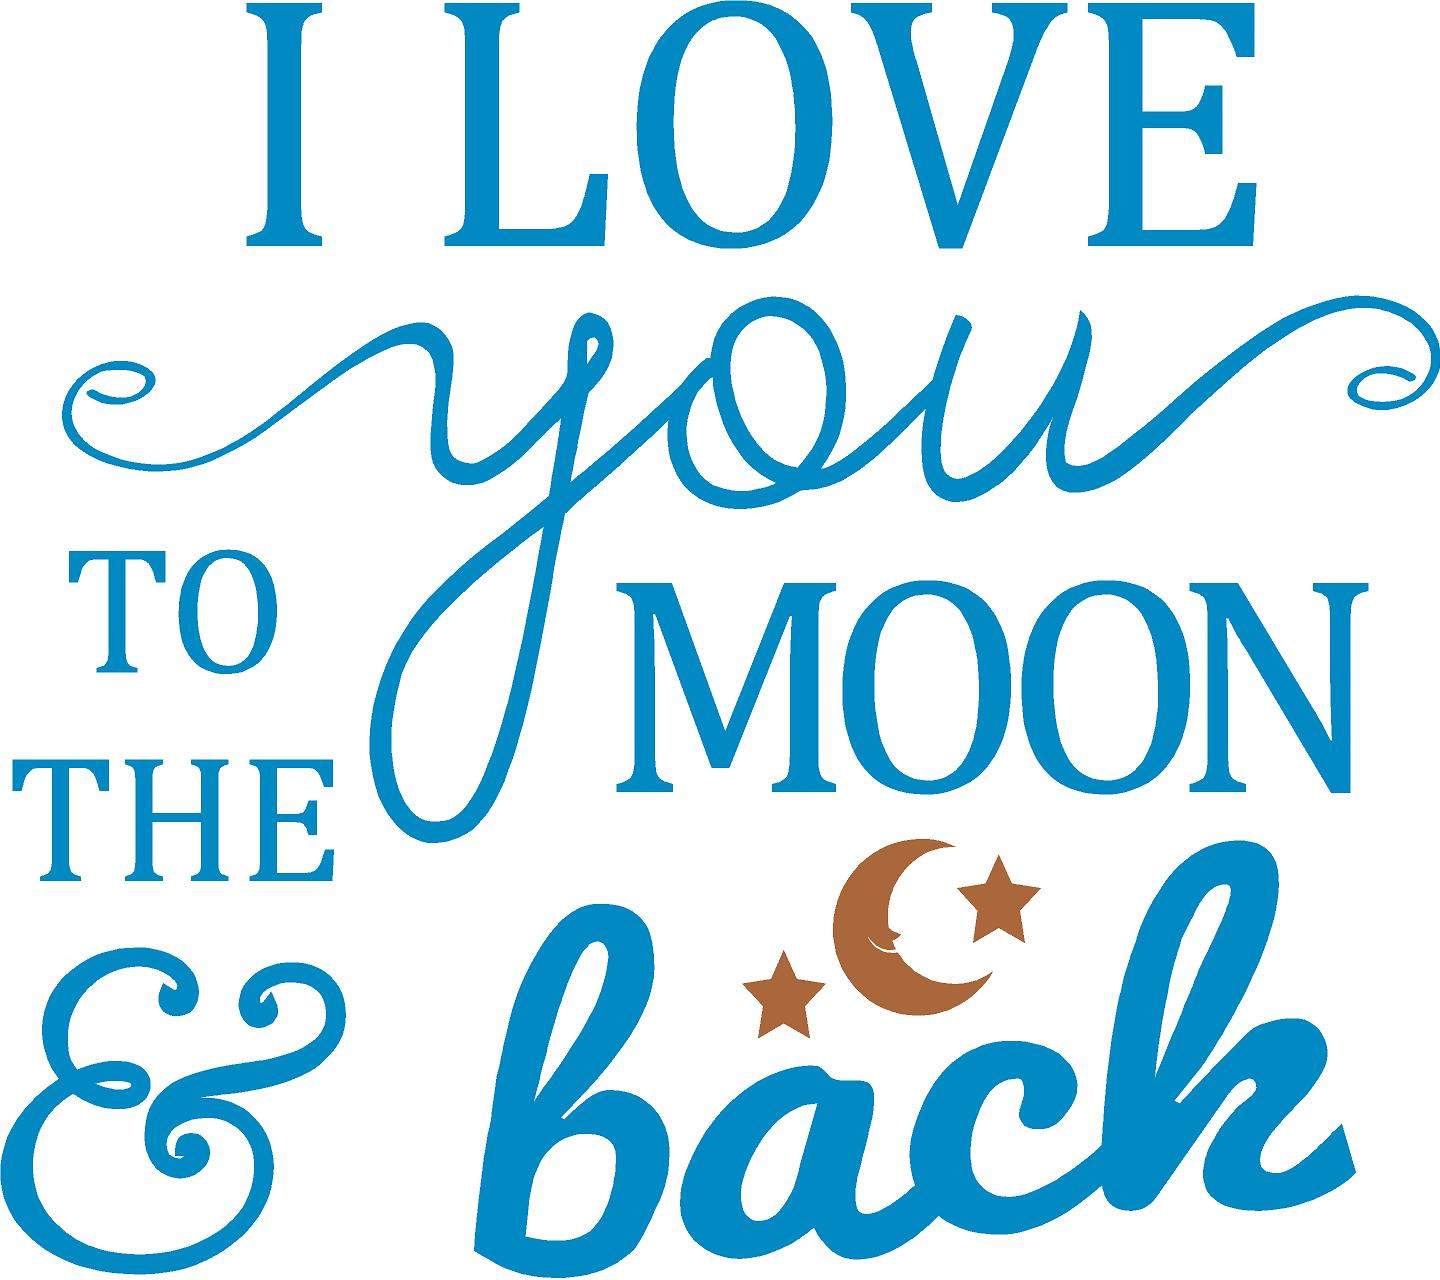 I Love You To The Moon And Back Quotes
 I Love You To The Moon & Back Quote the Walls